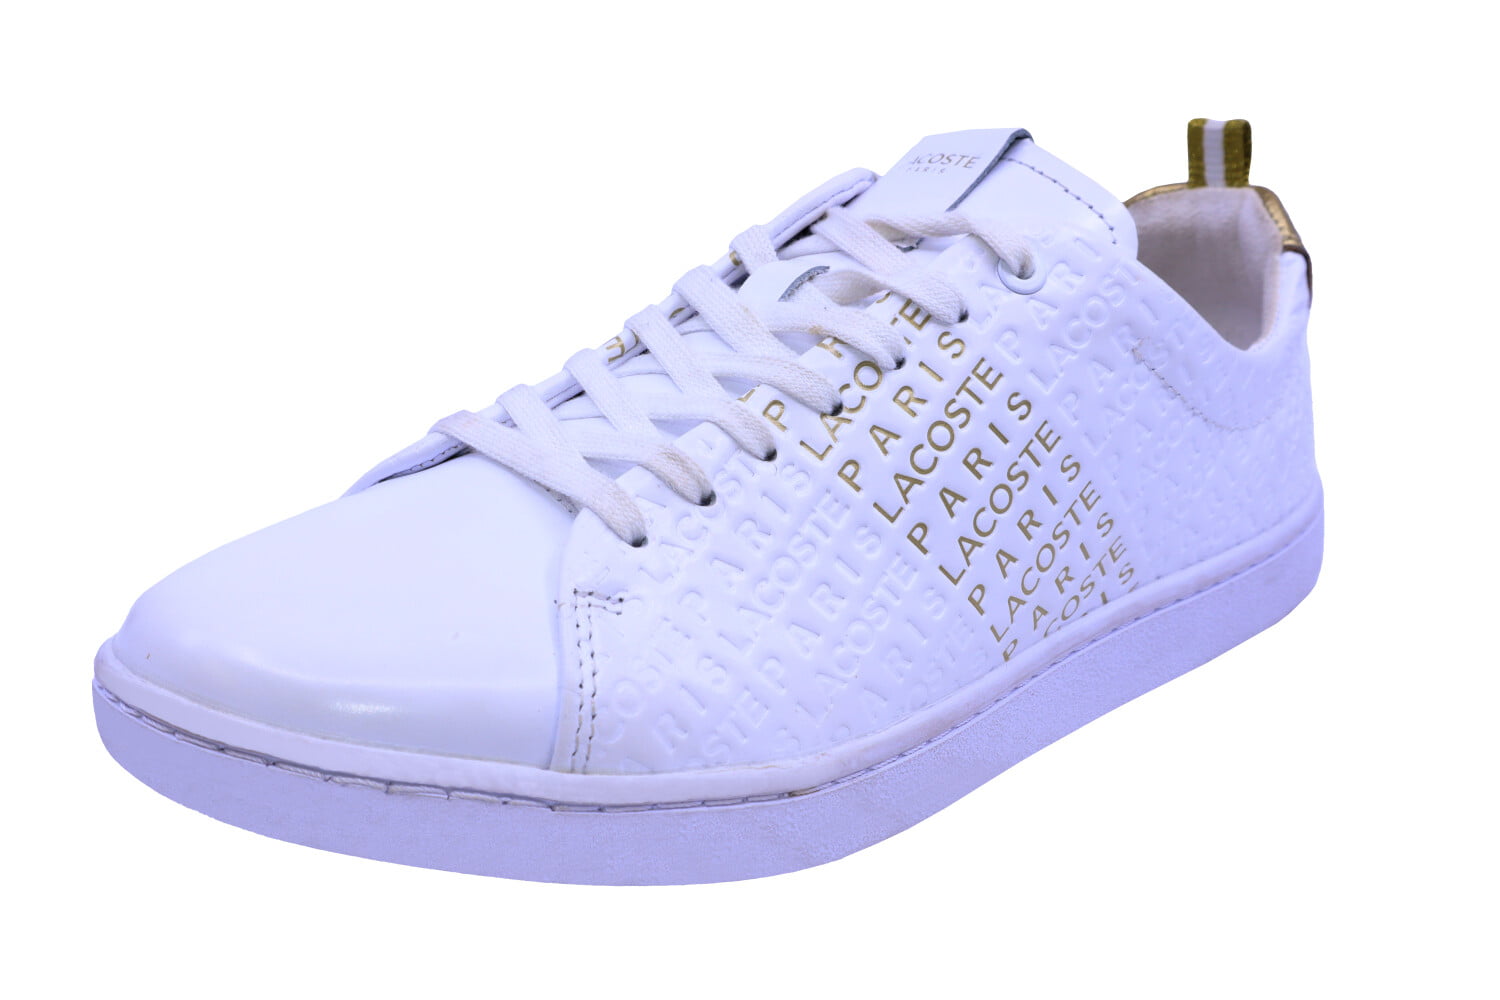 Lacoste Women's Carnaby Evo 119 1 Leather Lace Up Light Purple White 